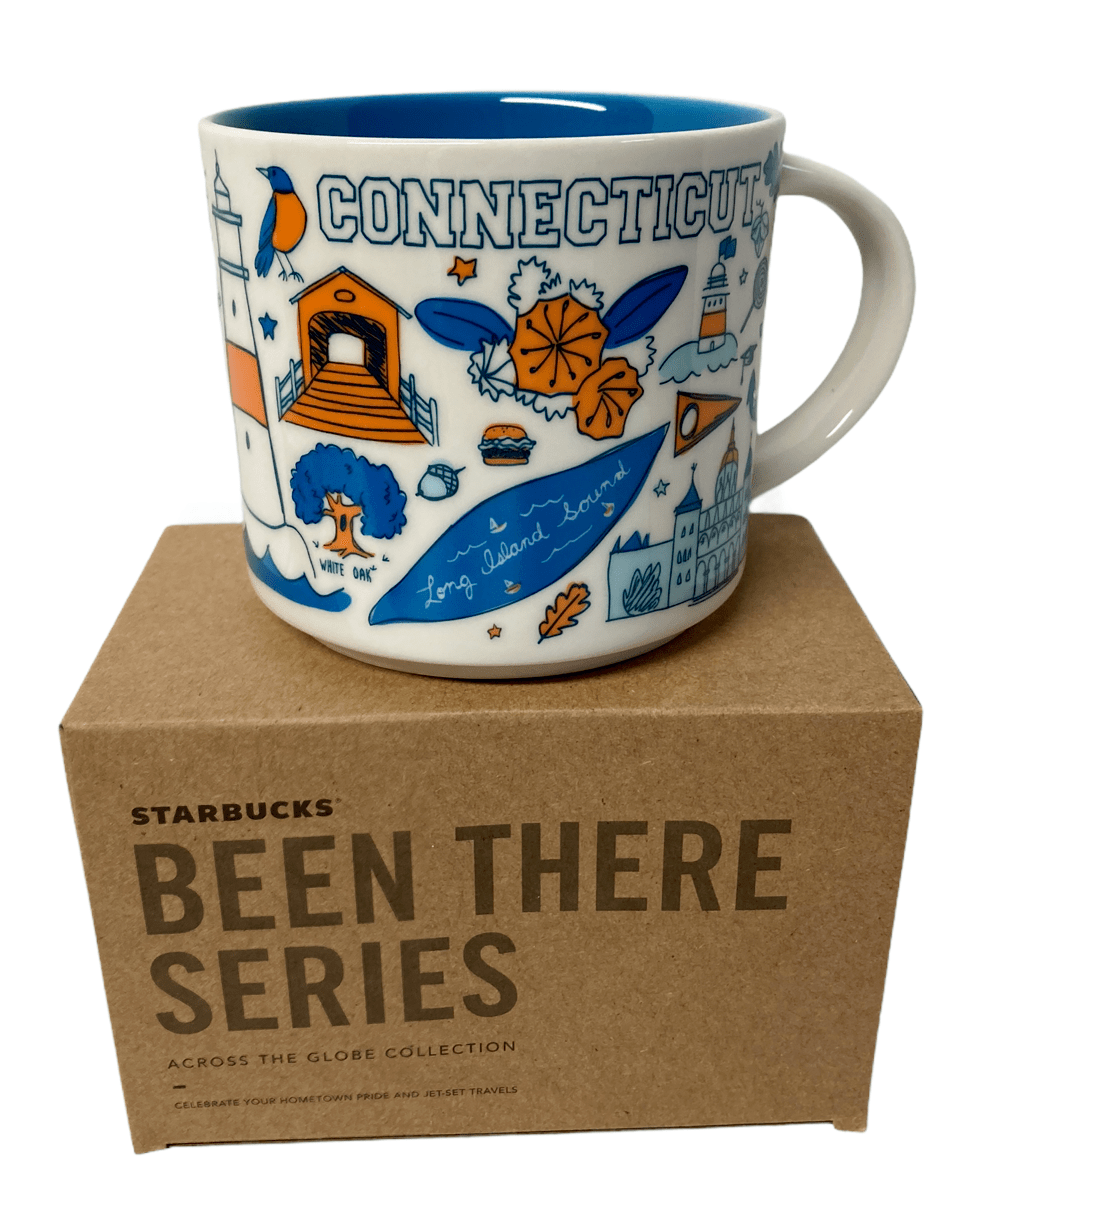 14 Oz Starbucks Connecticut Been There Series Across the Globe Collection Mug